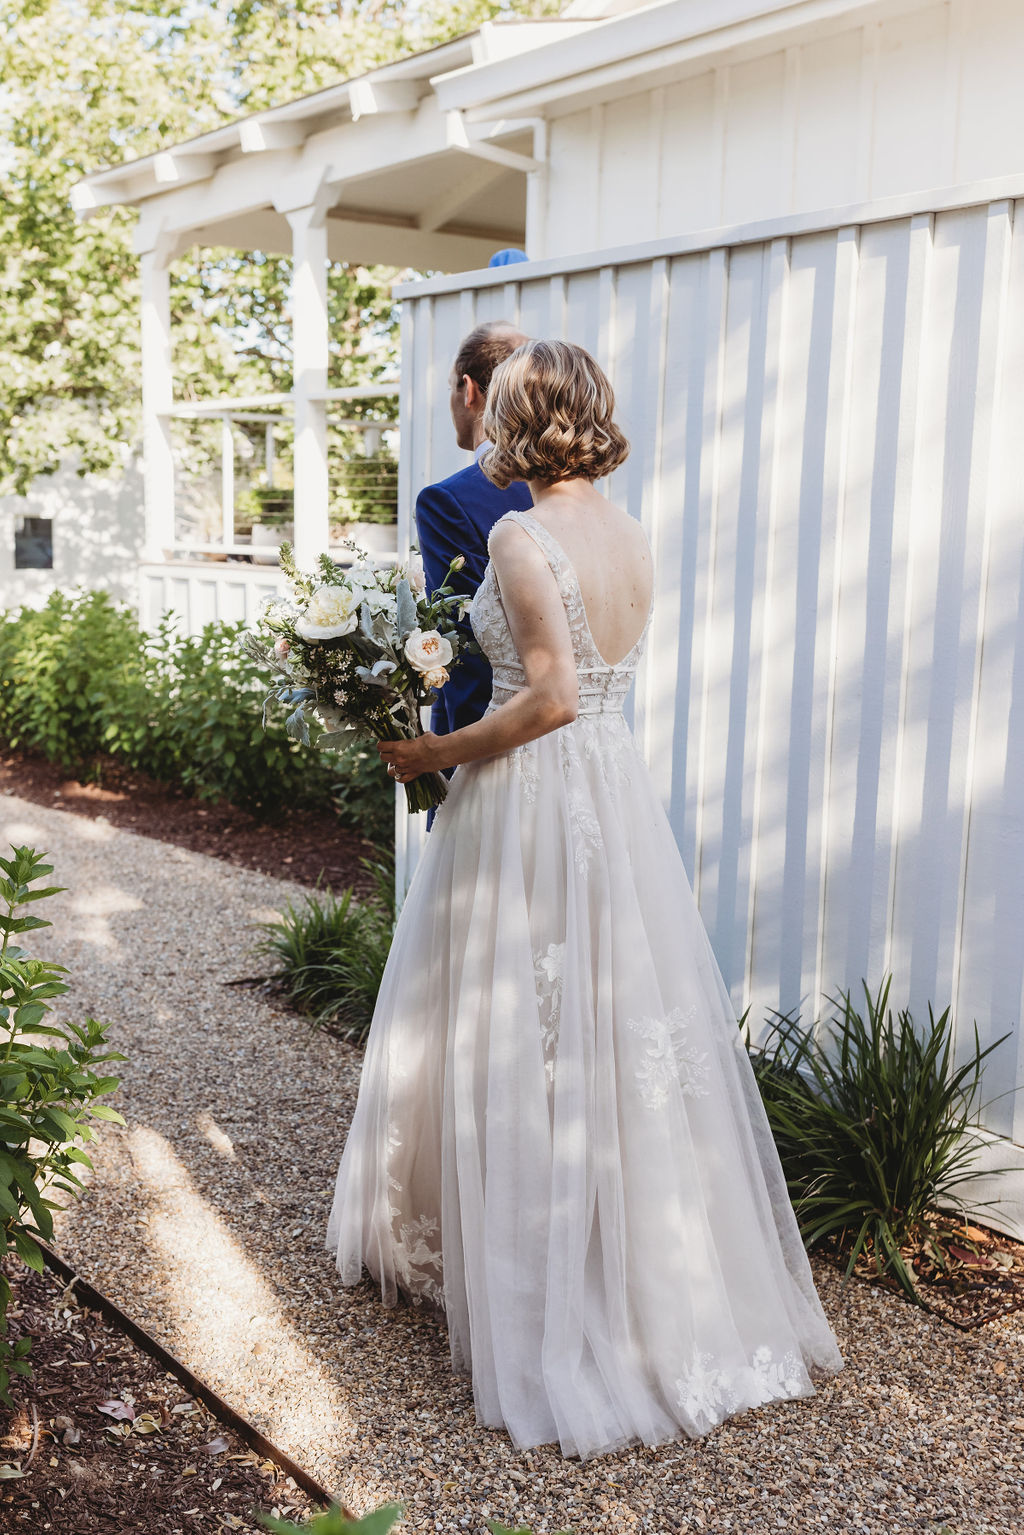 Intimate Sonoma Wedding In The Wine Country